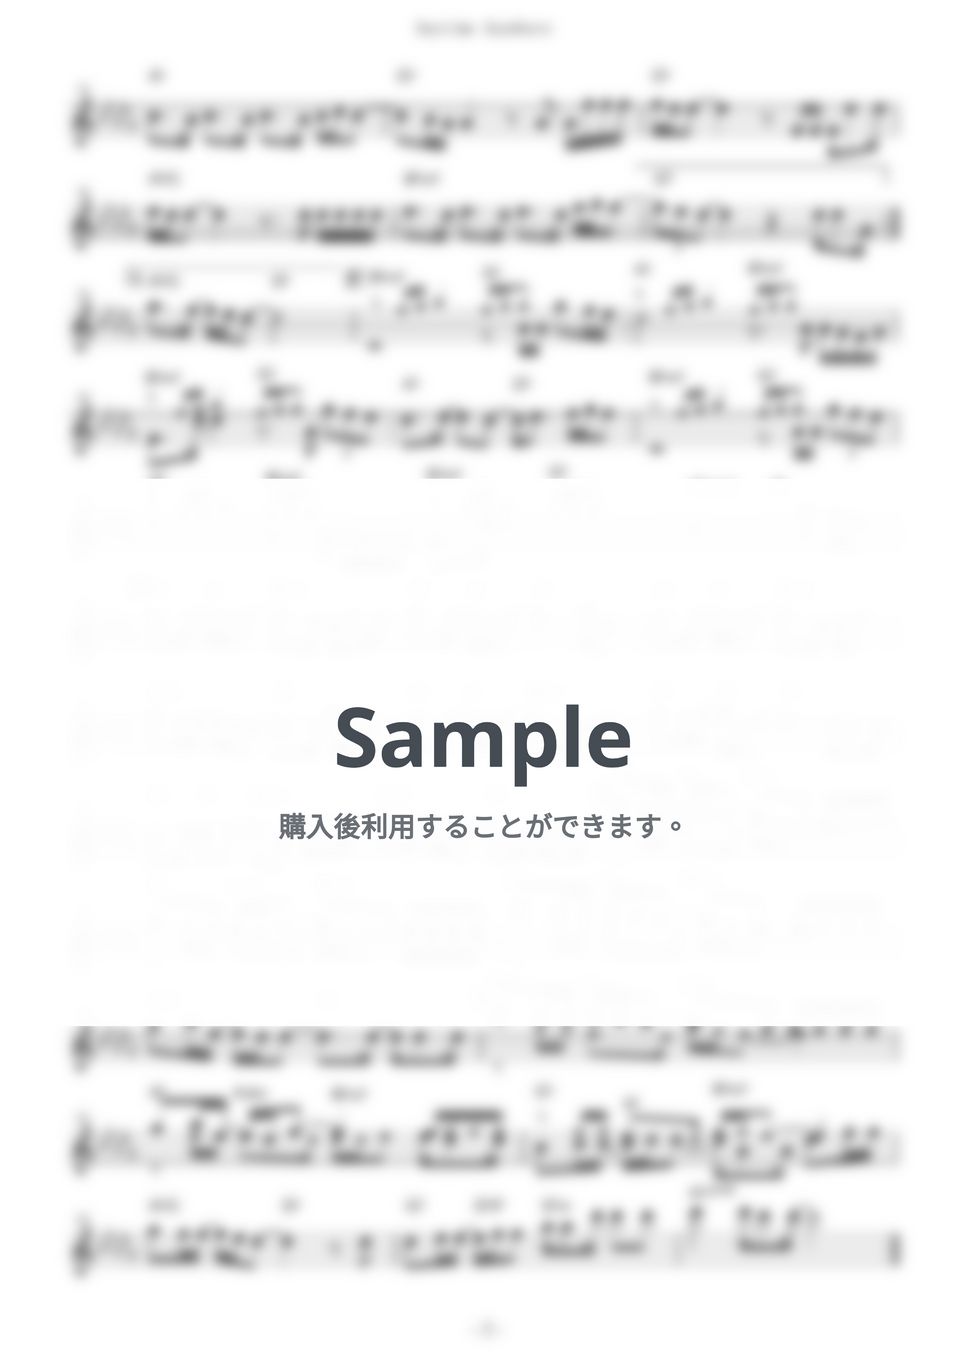 milet - Anytime Anywhere (『葬送のフリーレン』 / in Eb) by muta-sax